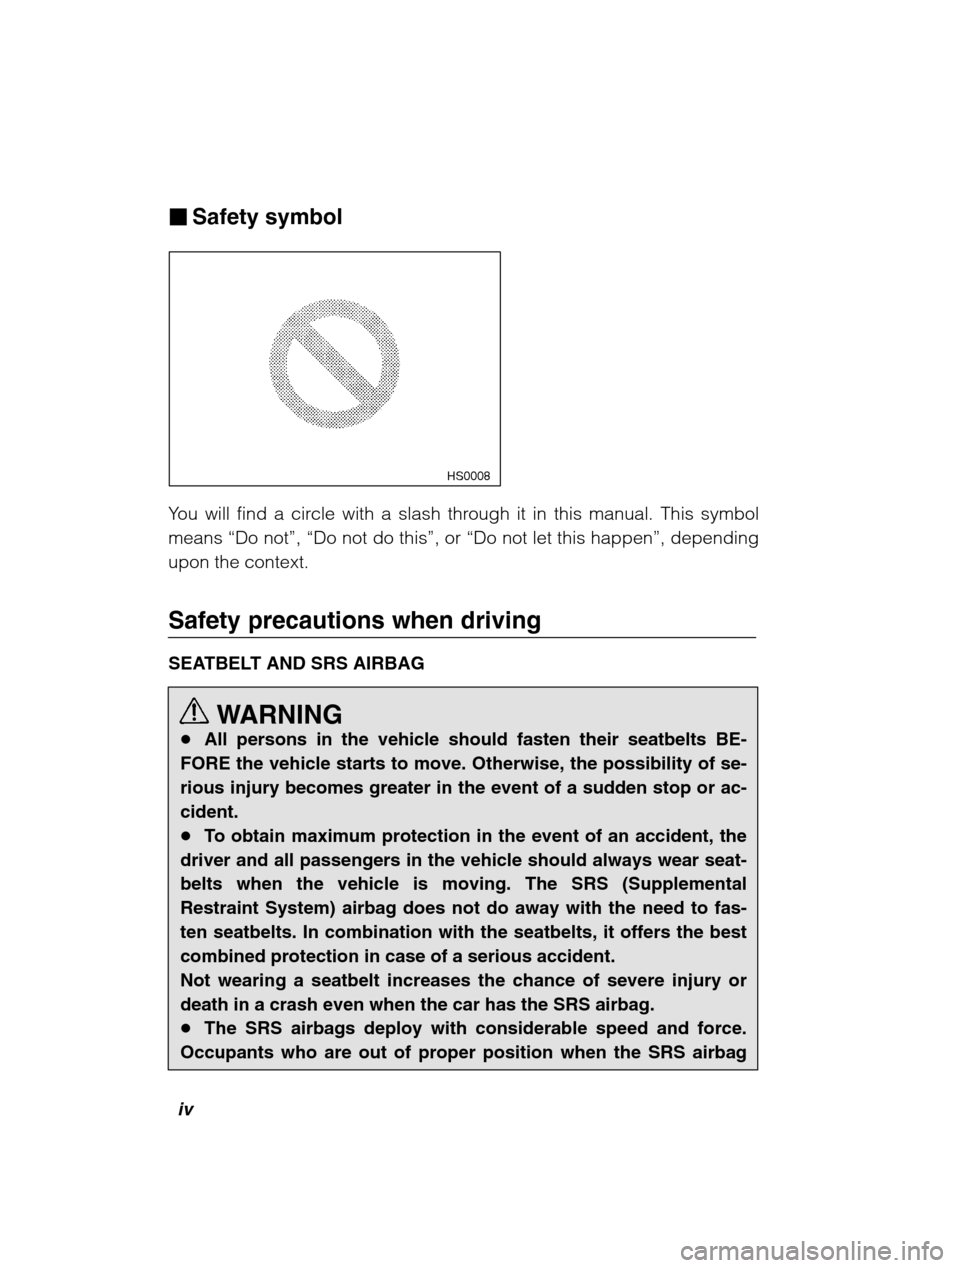 SUBARU FORESTER 2002 SG / 2.G Owners Manual iv
�Safety symbol
 HS0008
You will find a circle with a slash through it in this manual. This symbol means  “Do not ”, “Do not do this ”, or  “Do not let this happen ”, depending
upon the 